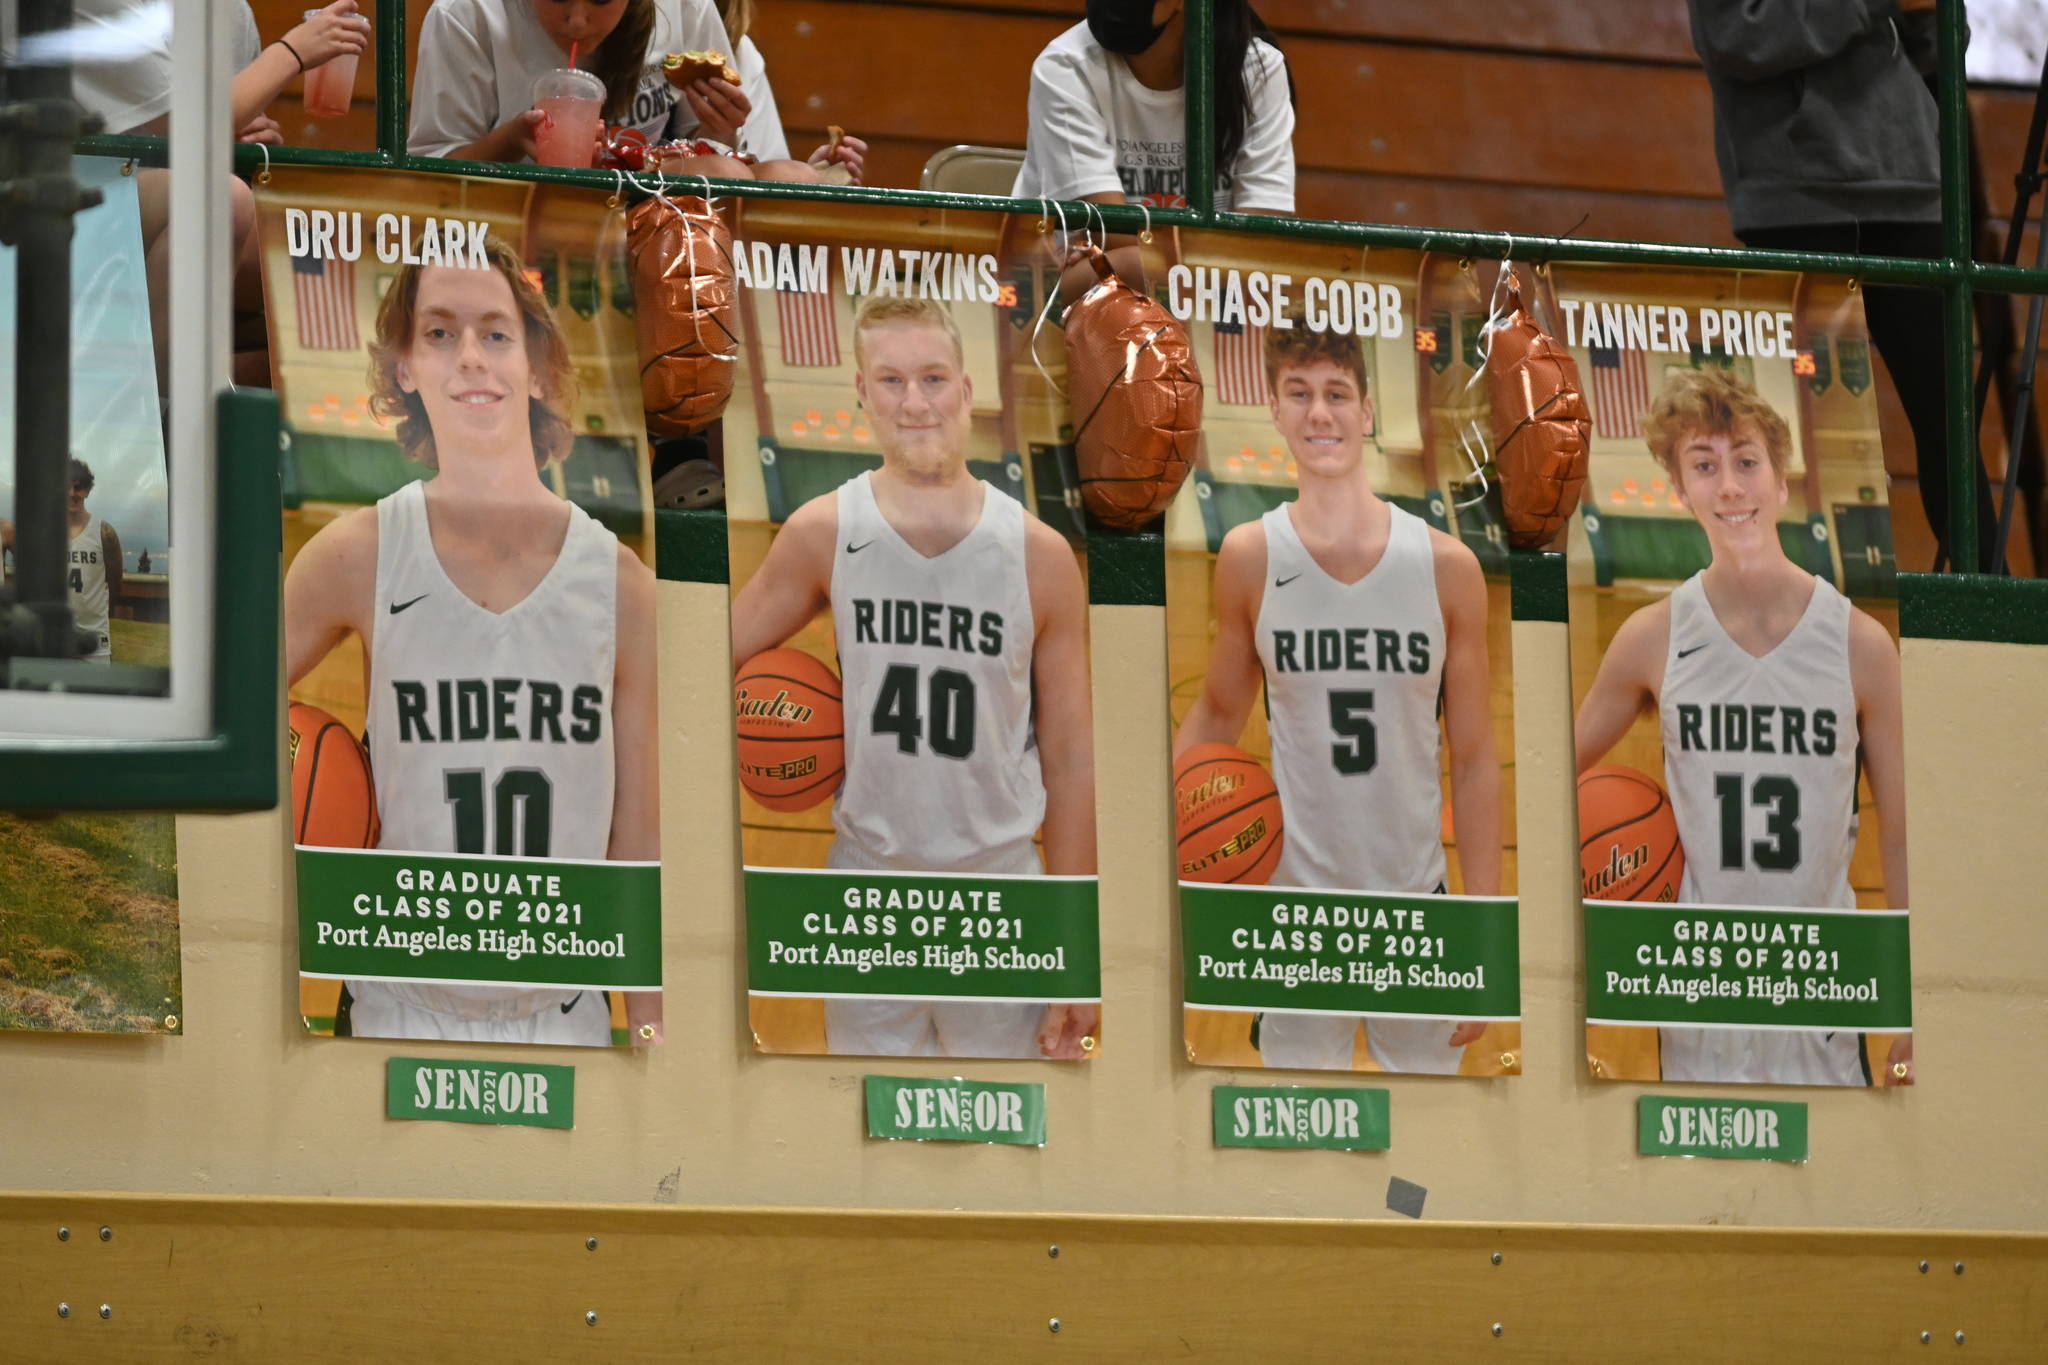 Posters of Port Angeles seniors Dru Clark, Adam Watkins, Chase Cobb and Tanner Price adorned the walls of the Rider Gym this season.
Michael Dashiell/Olympic Peninsula News Group